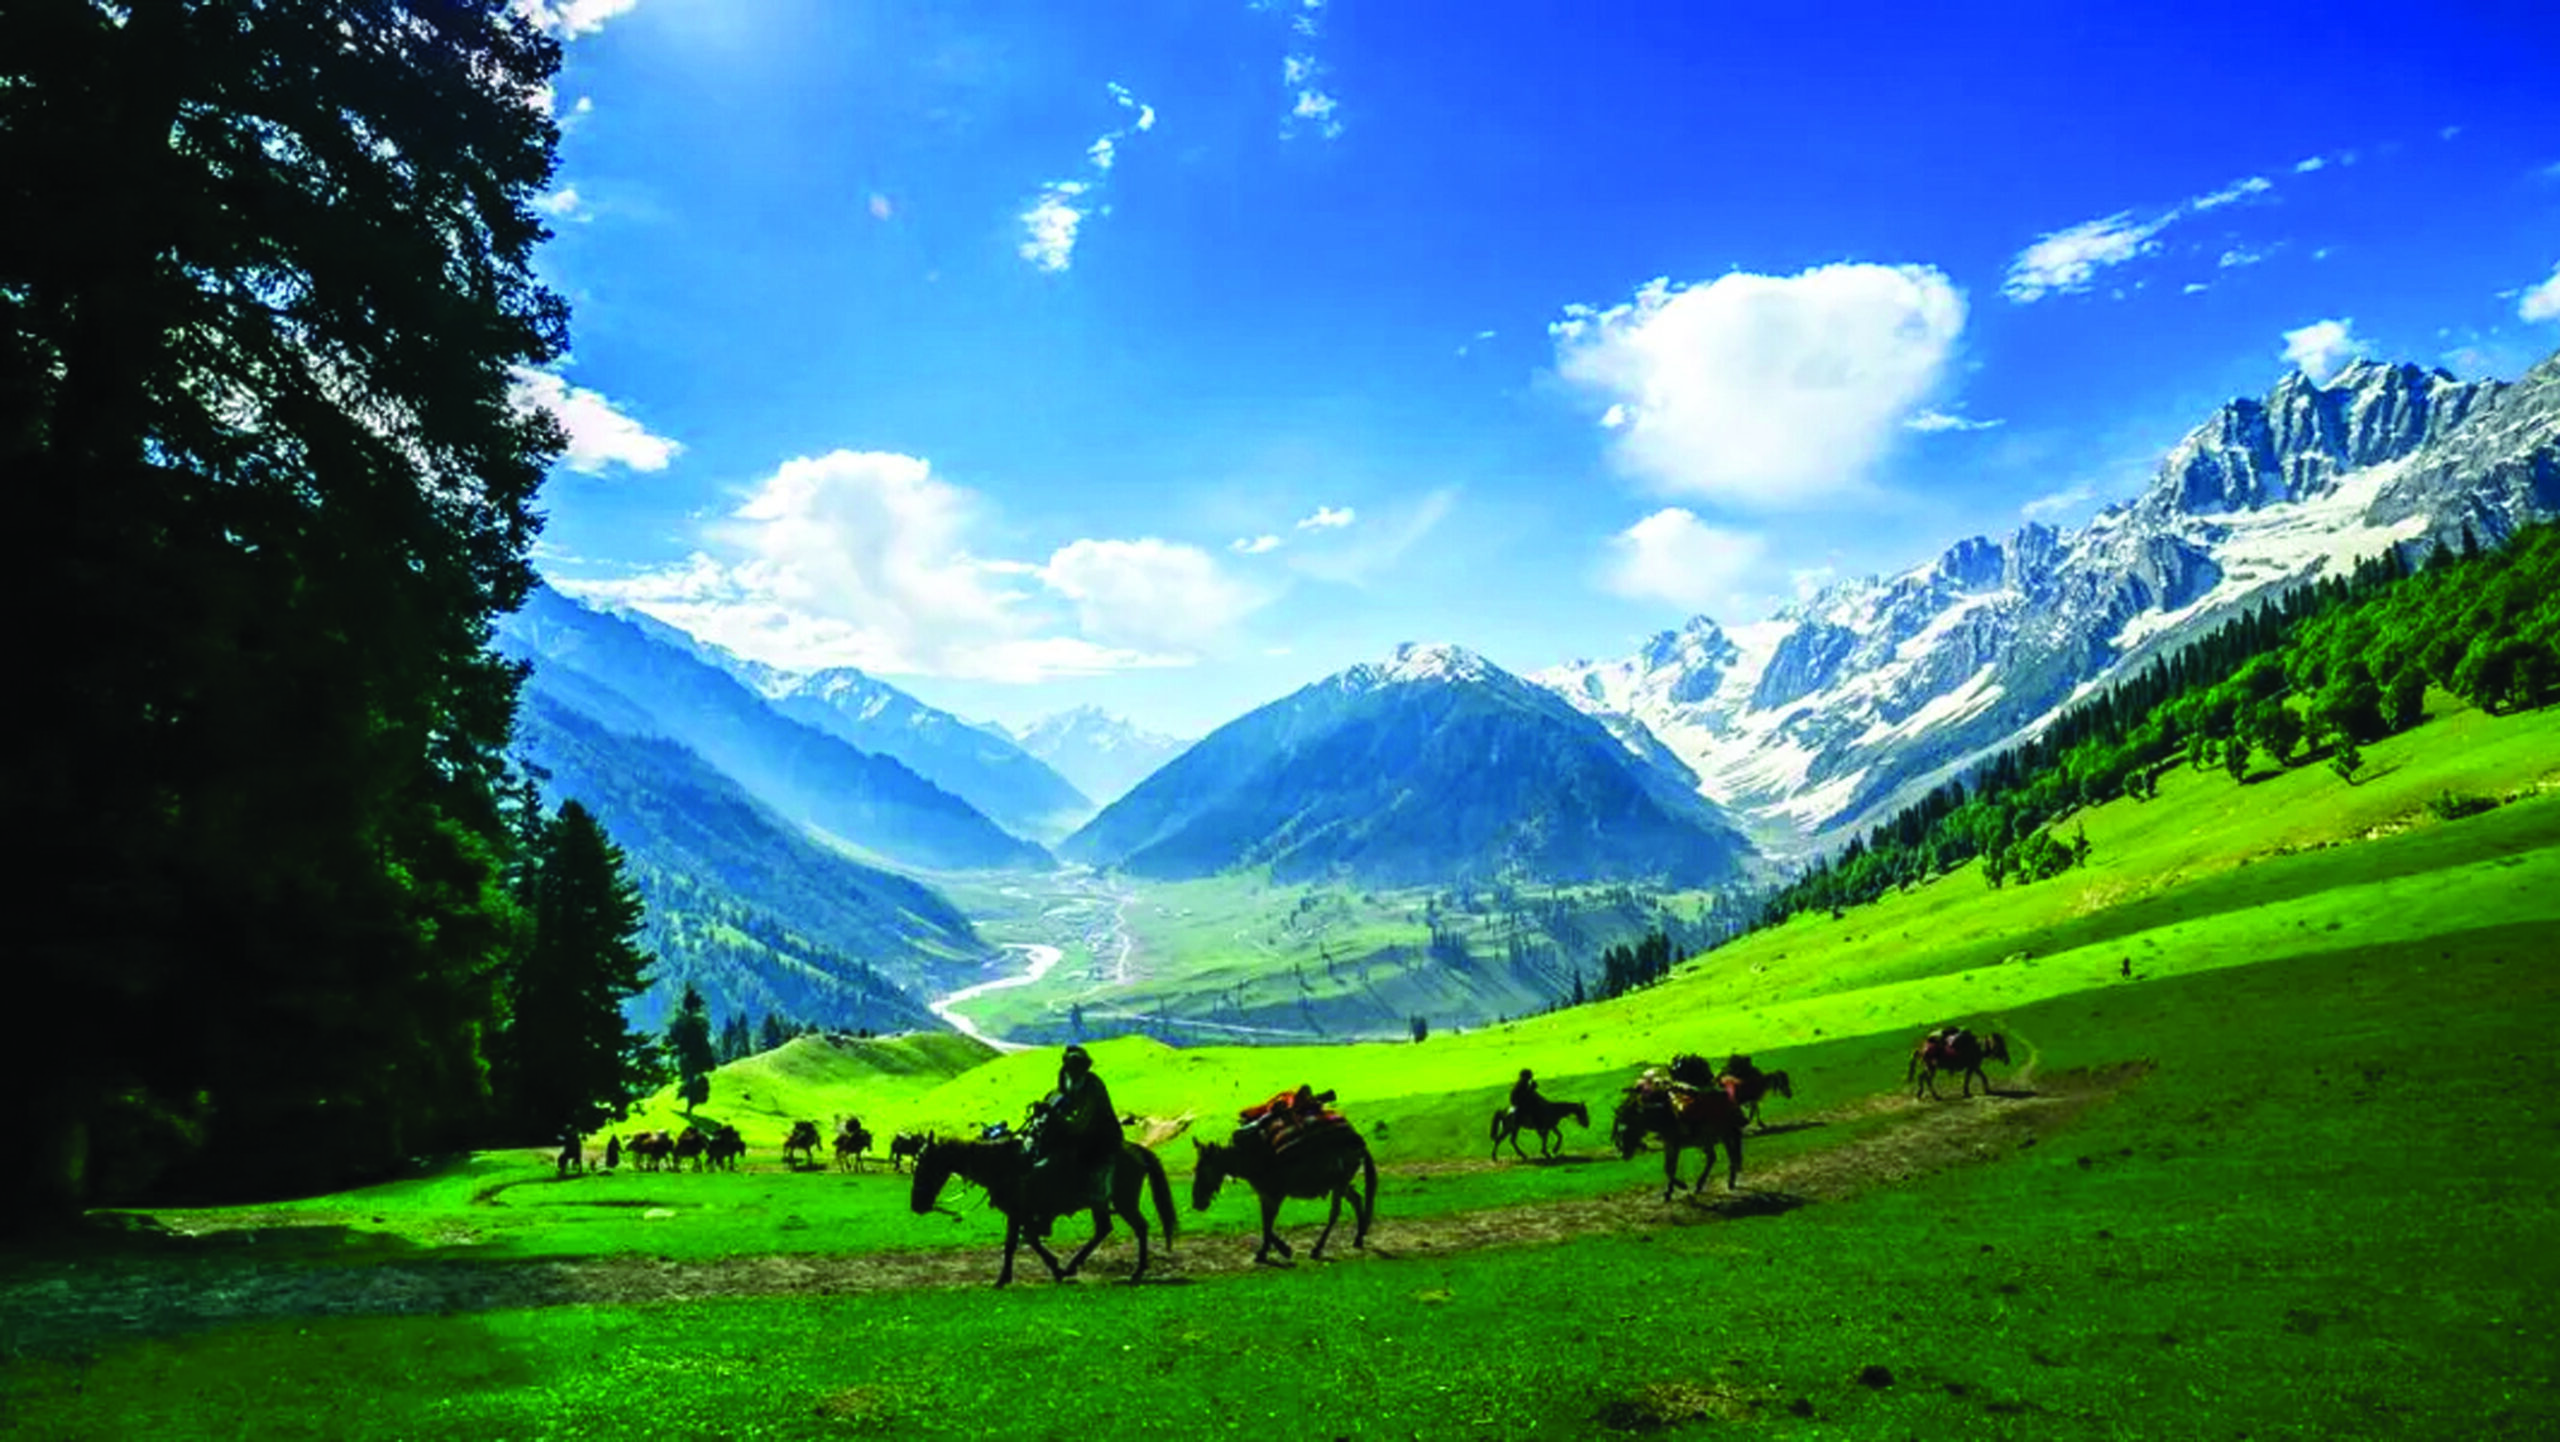 The Natural Wonders of Kashmir sat amid the mighty Himalayas